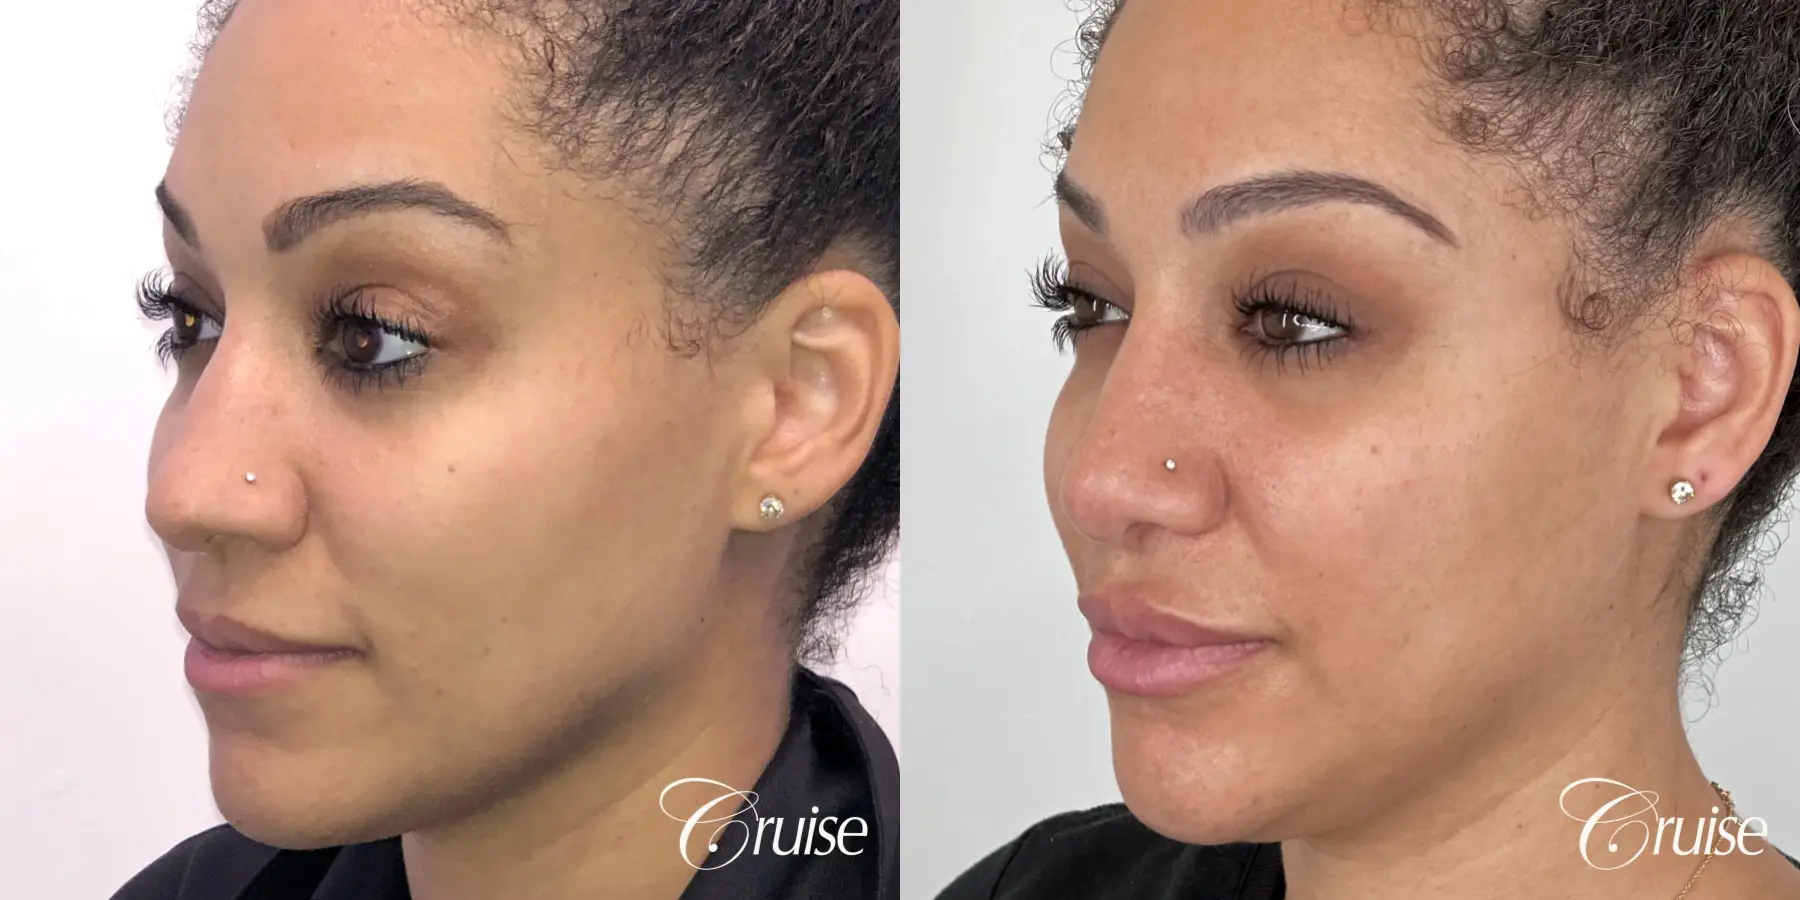 rhinoplasty orange county - Before and After 2